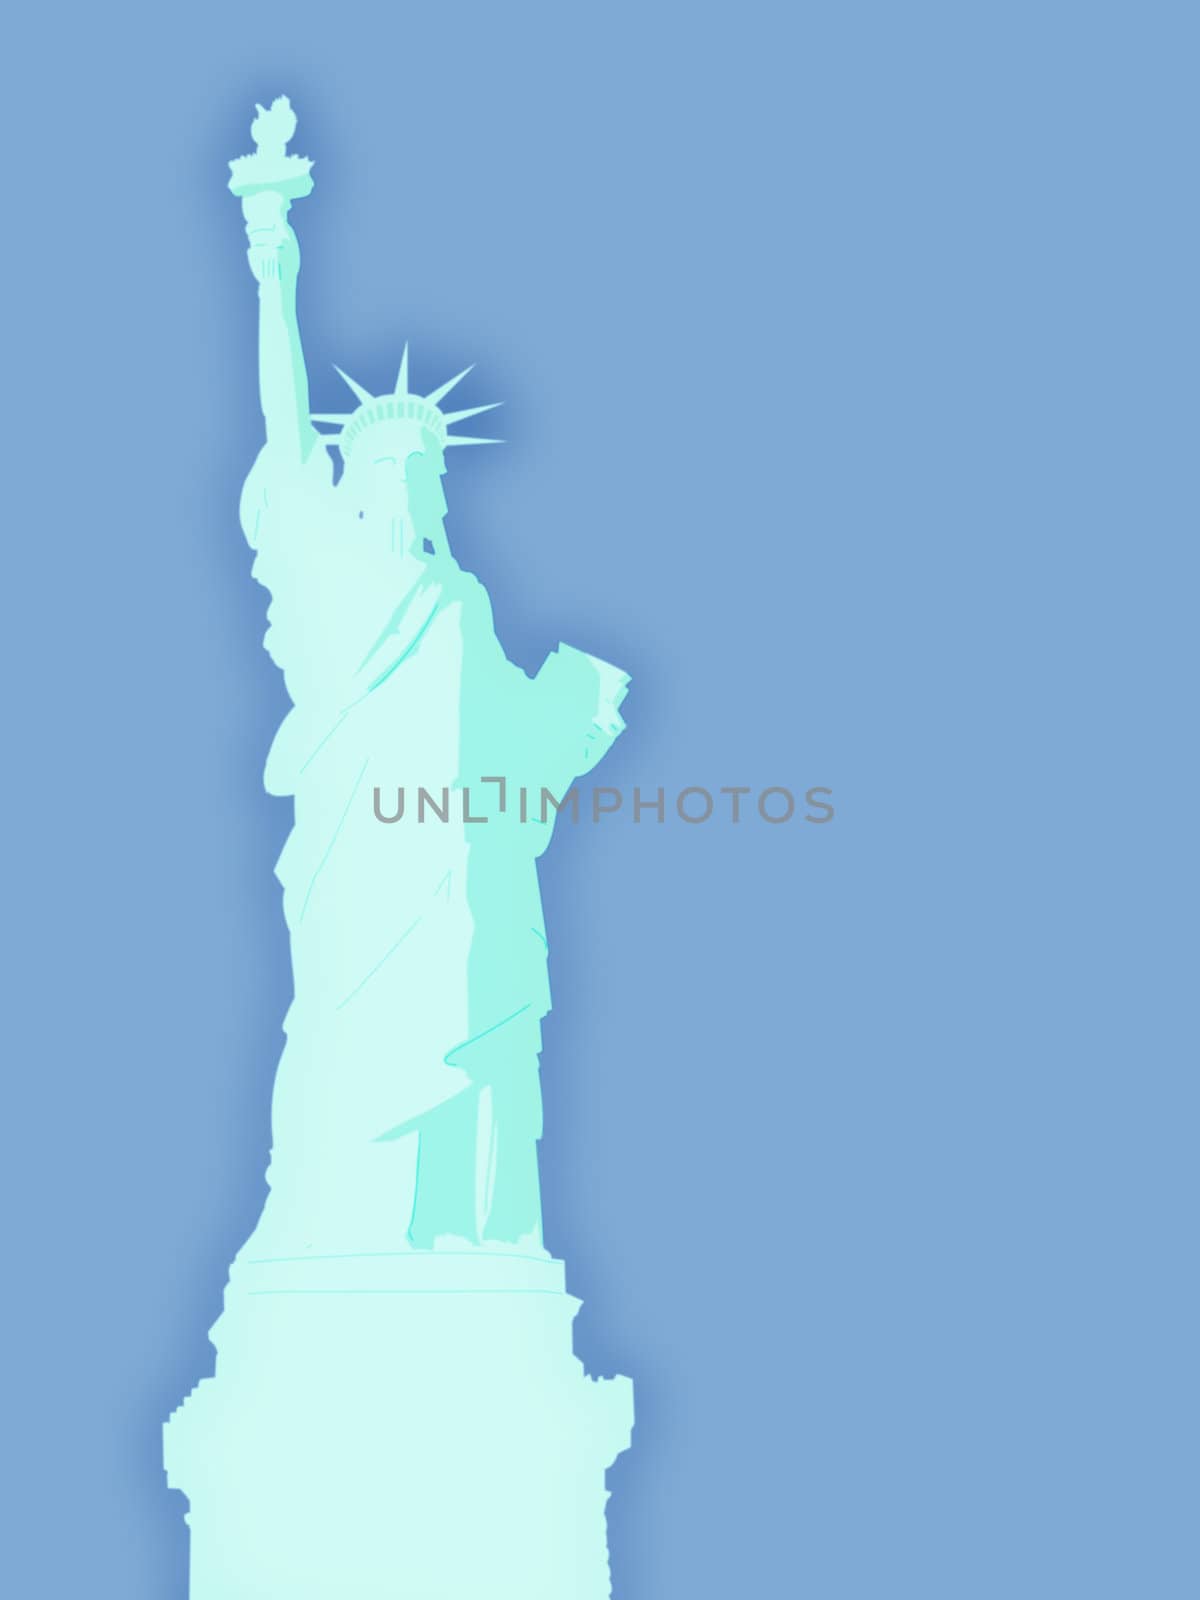 Blue Statue of Liberty Illustration with Sky Background